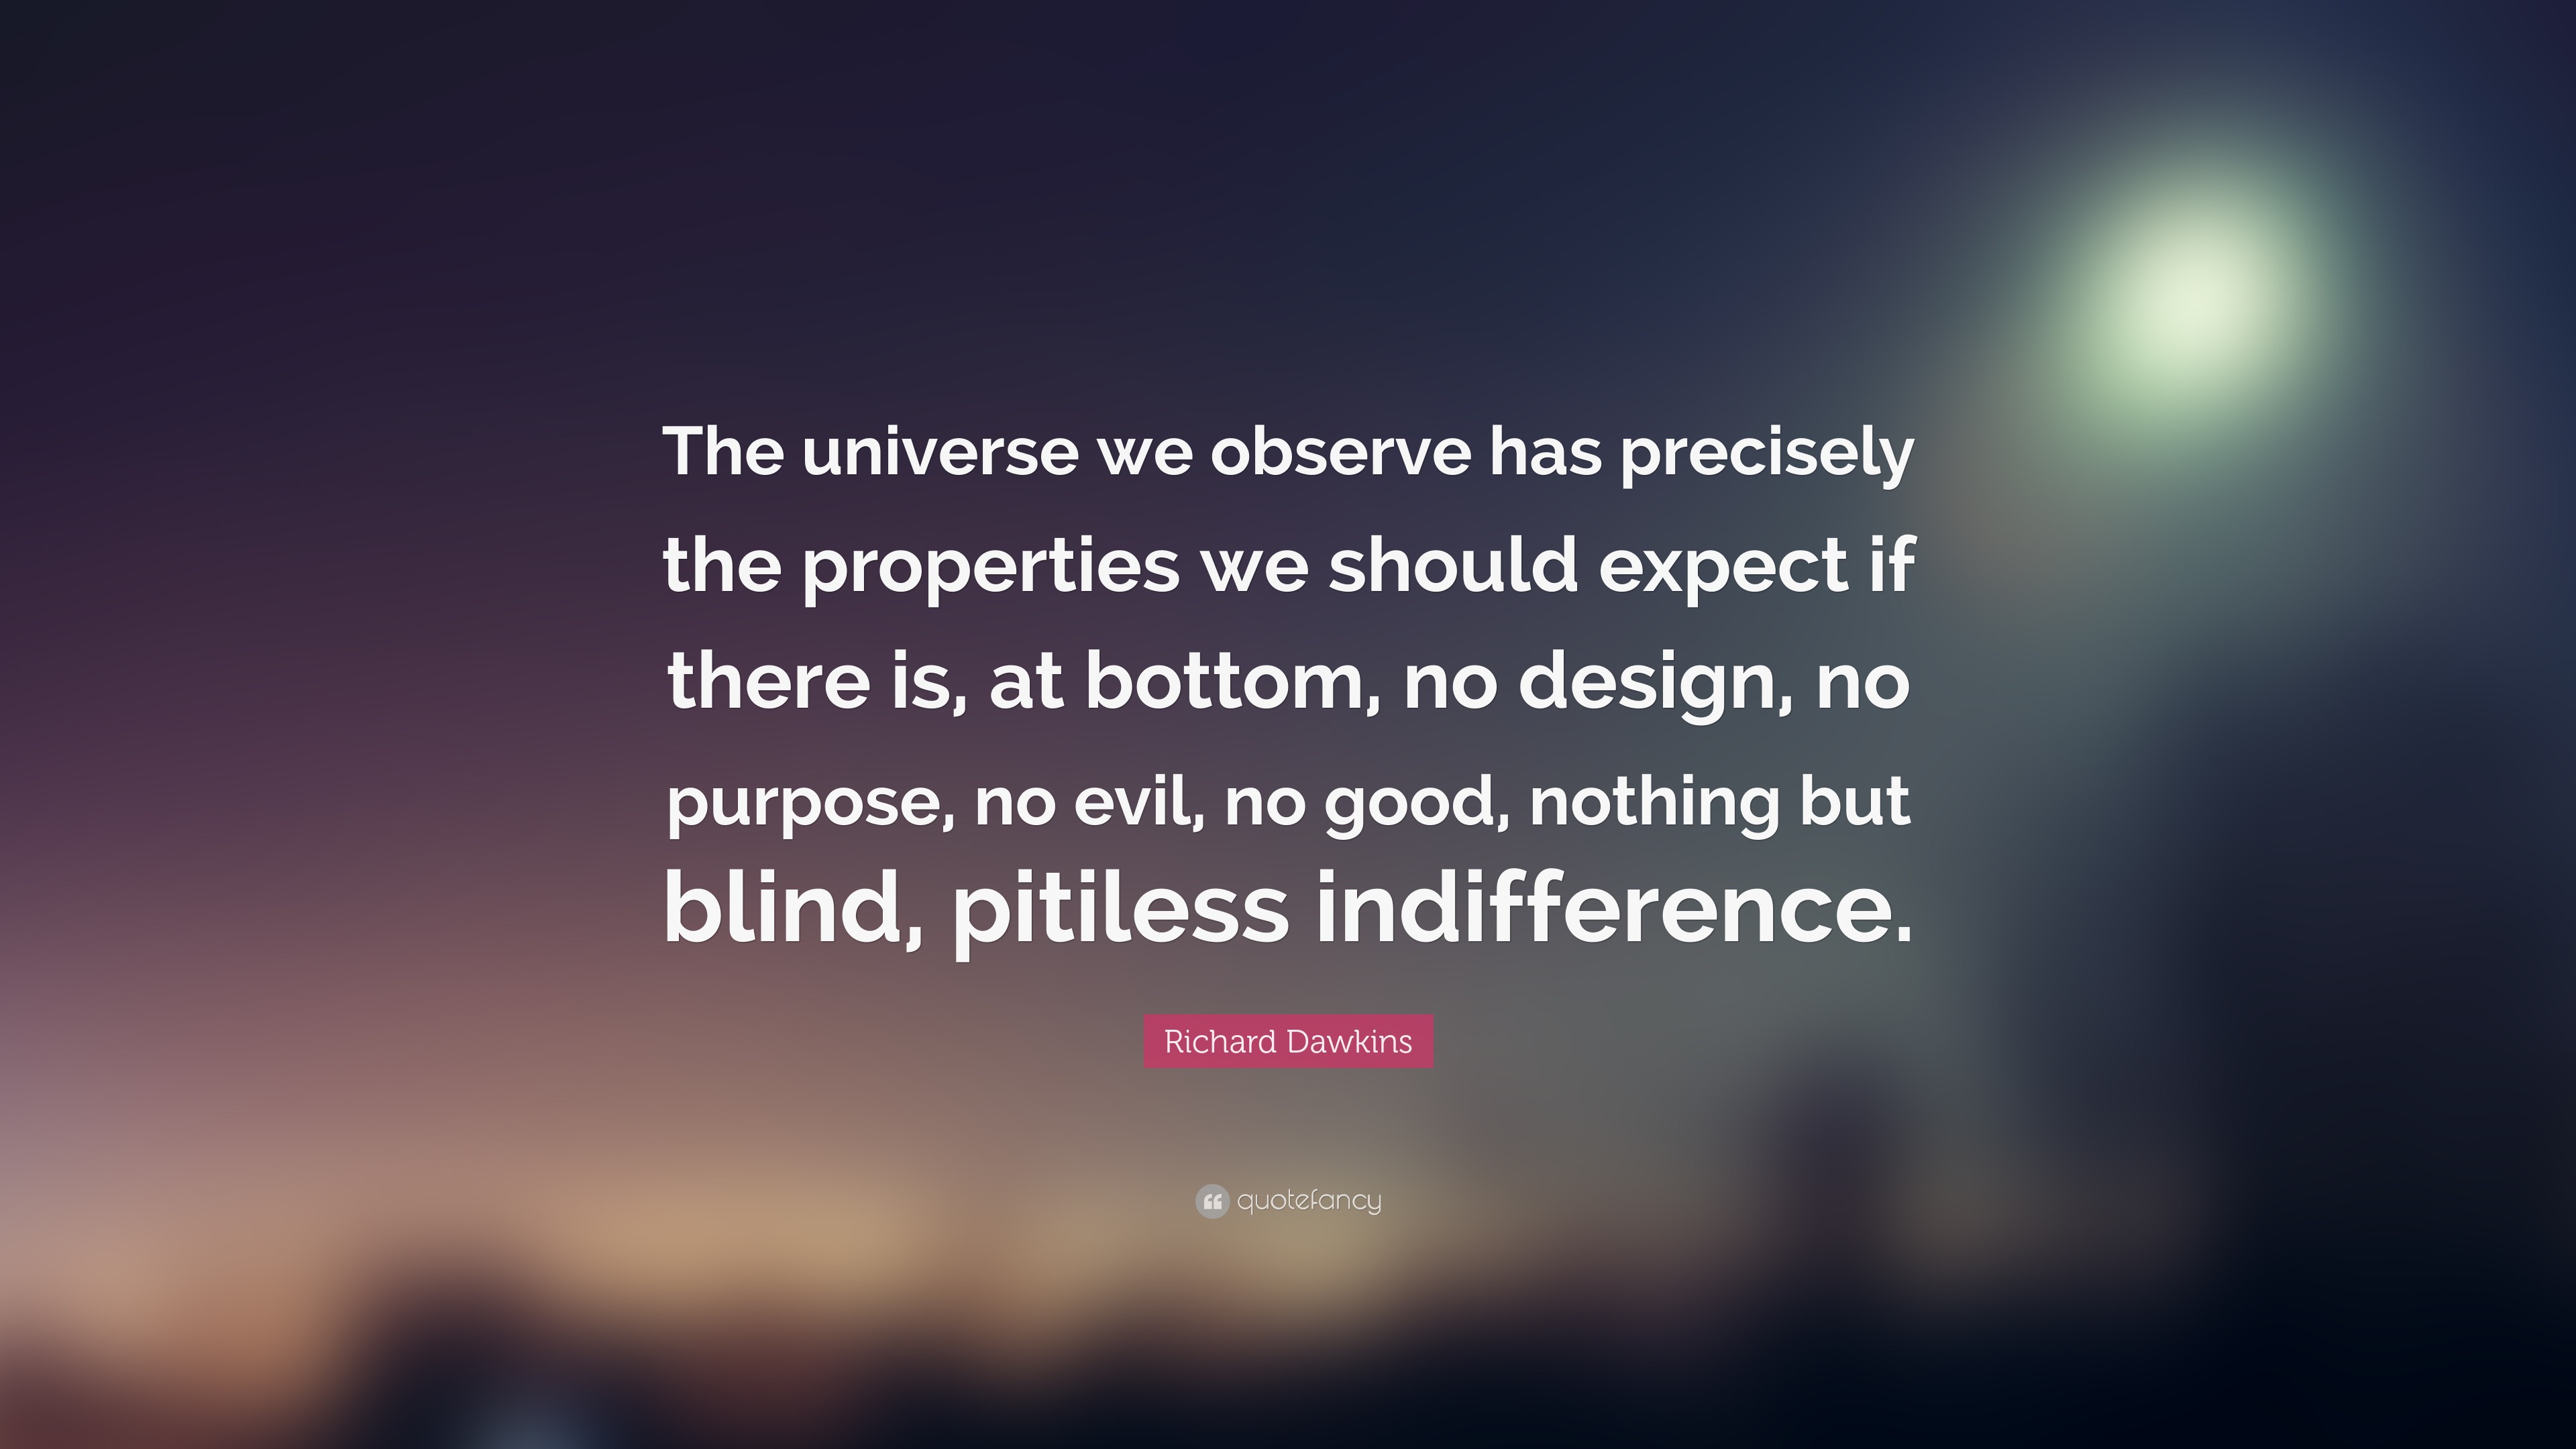 Richard Dawkins Quote: “The universe we observe has precisely the ...